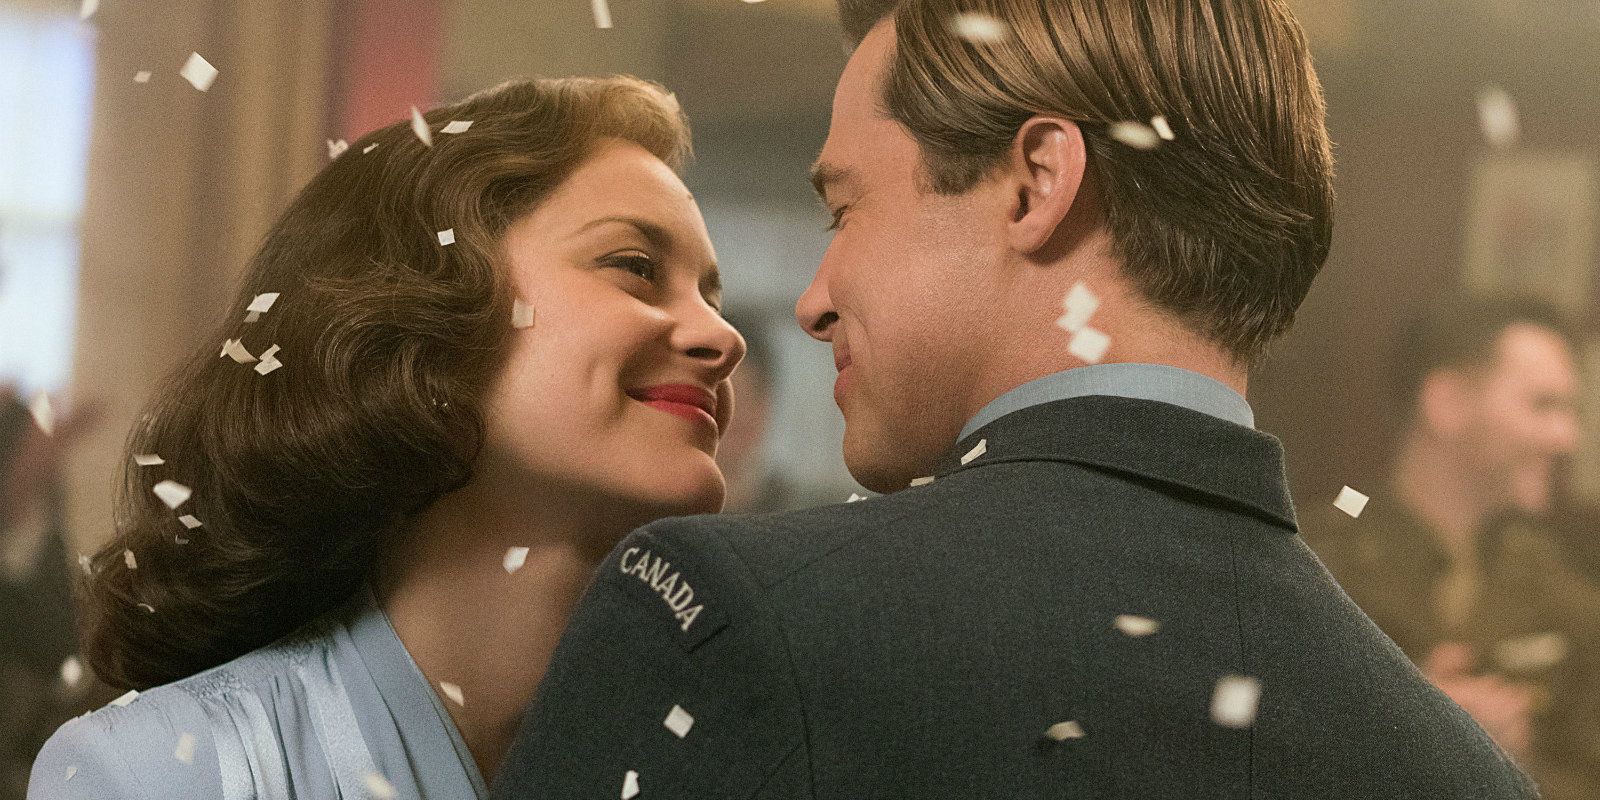 Marion Cotillard and Brad Pitt smile and dance at a party in the film Allied.